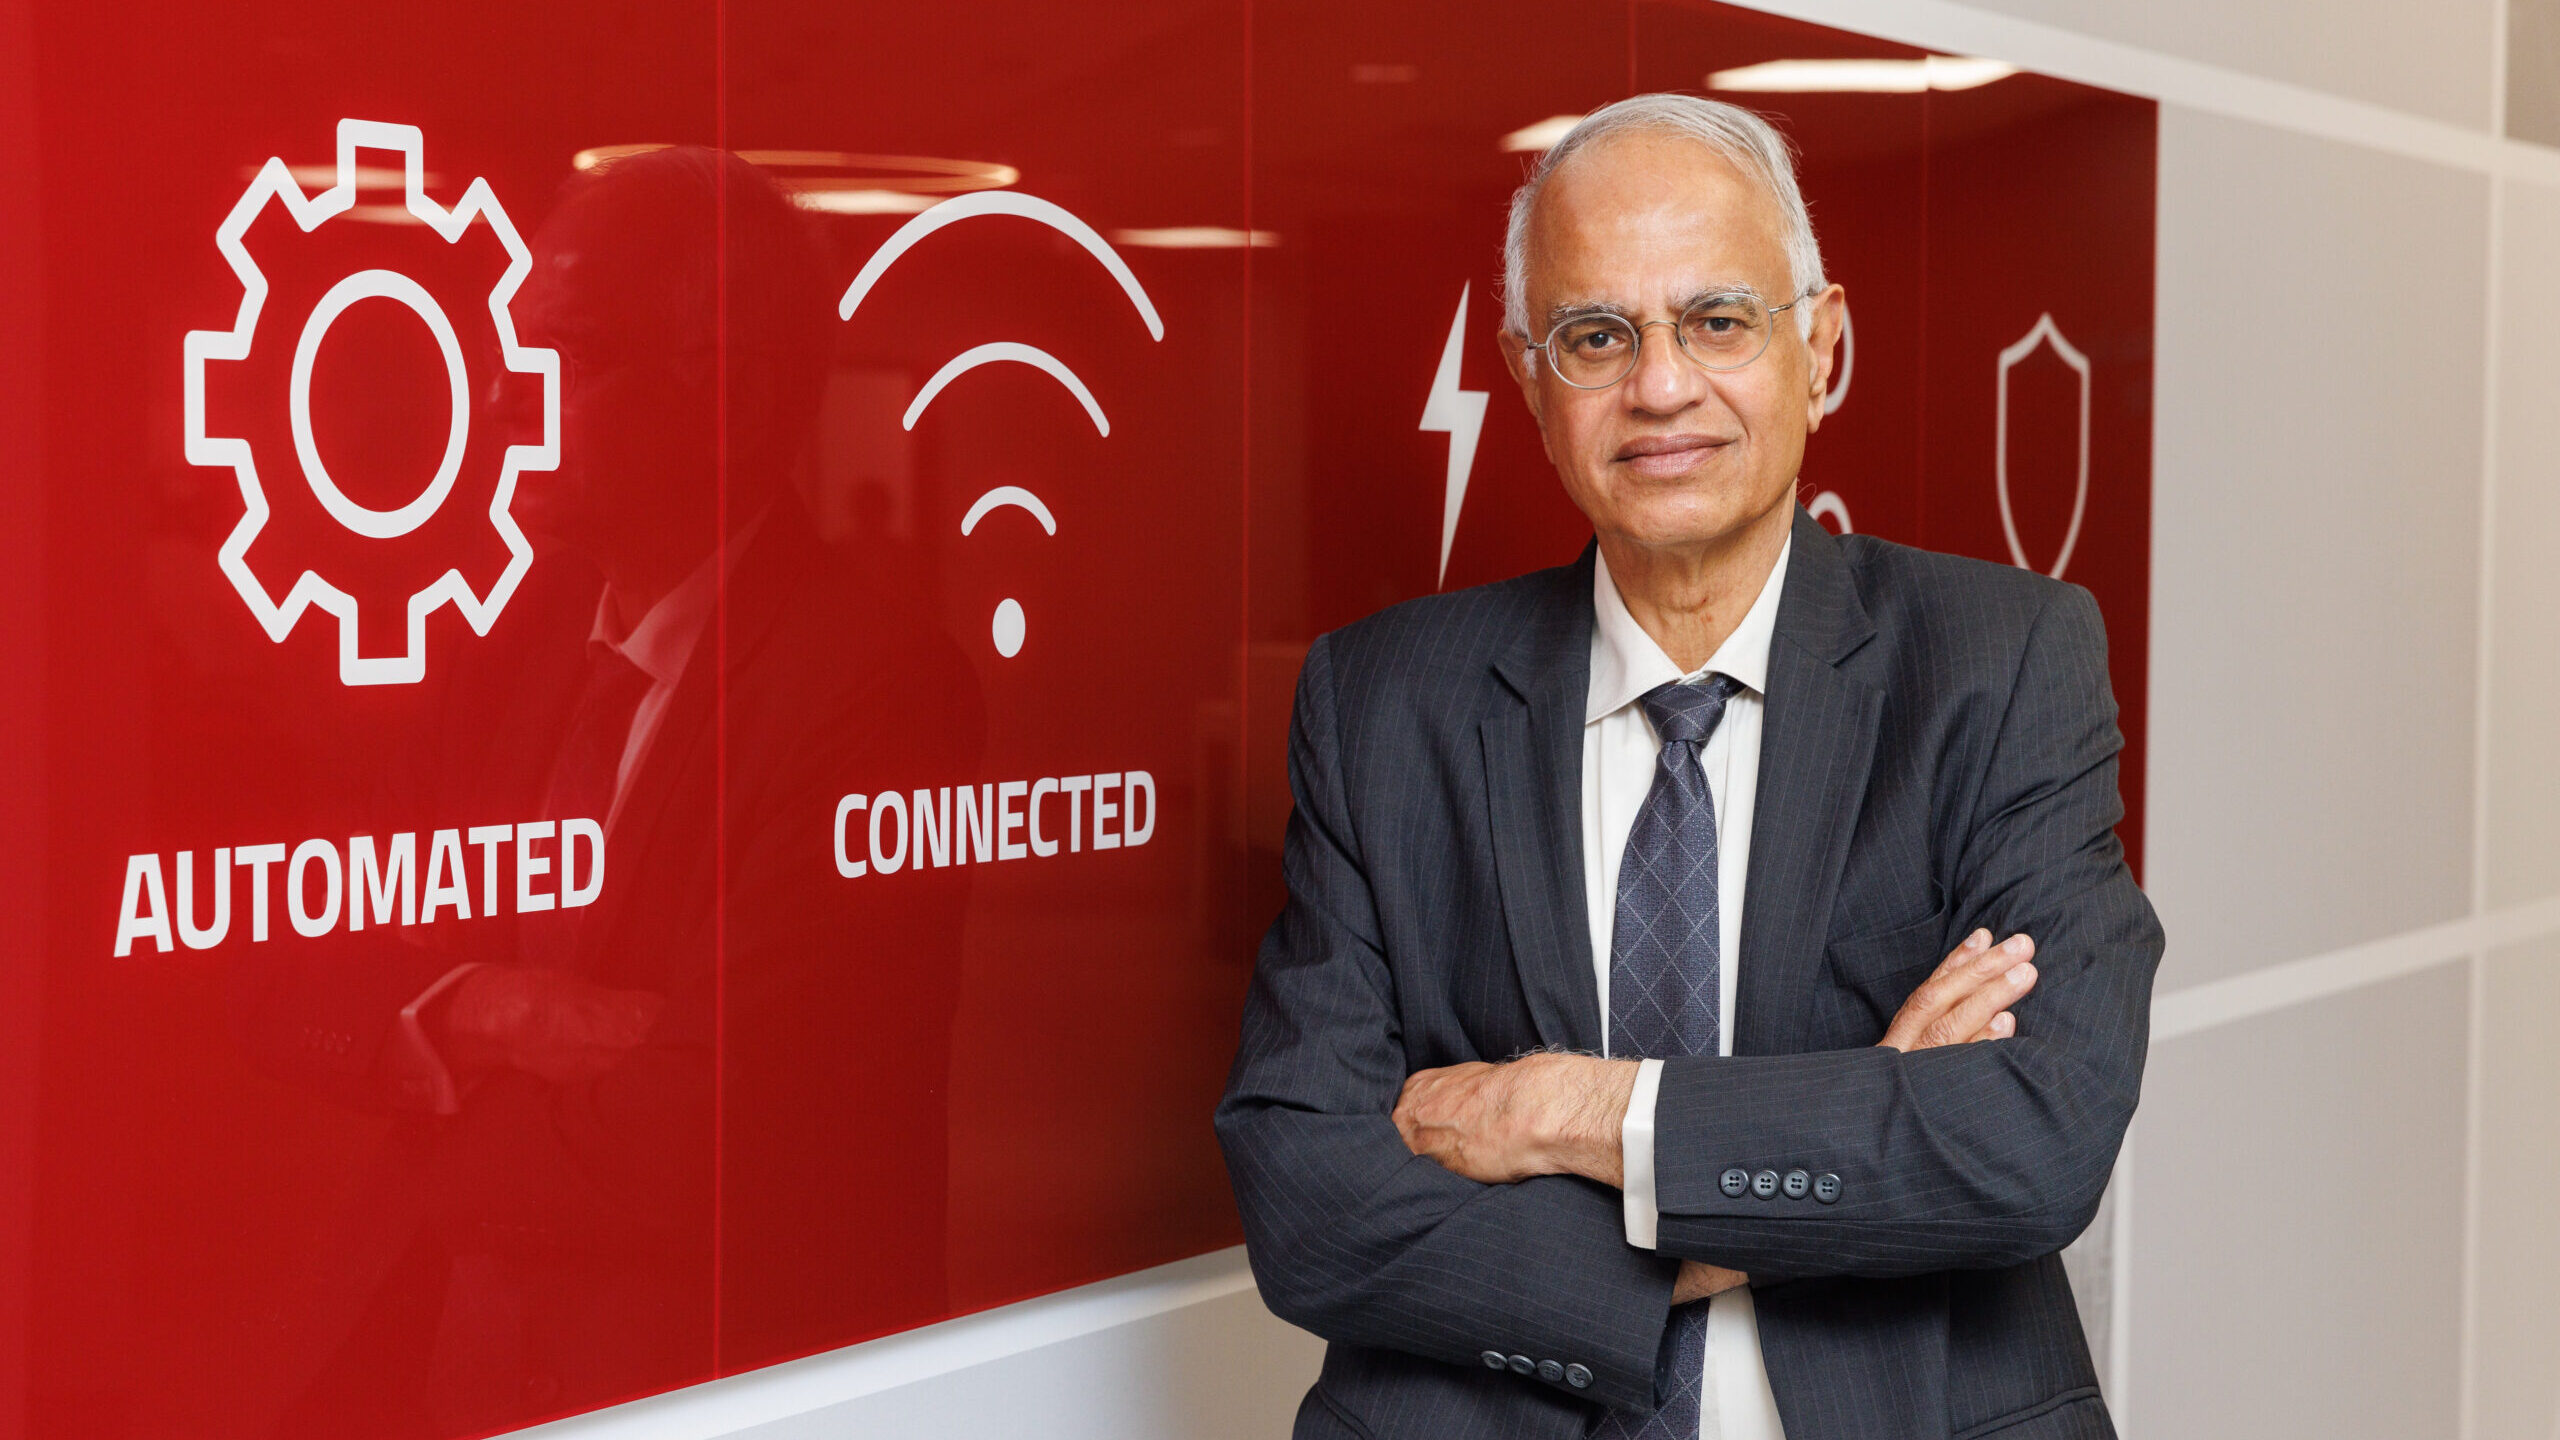 Dr. Bharat Balasubramanian stands in front of a sign with the words Automated, Connected, Shared and Safe.